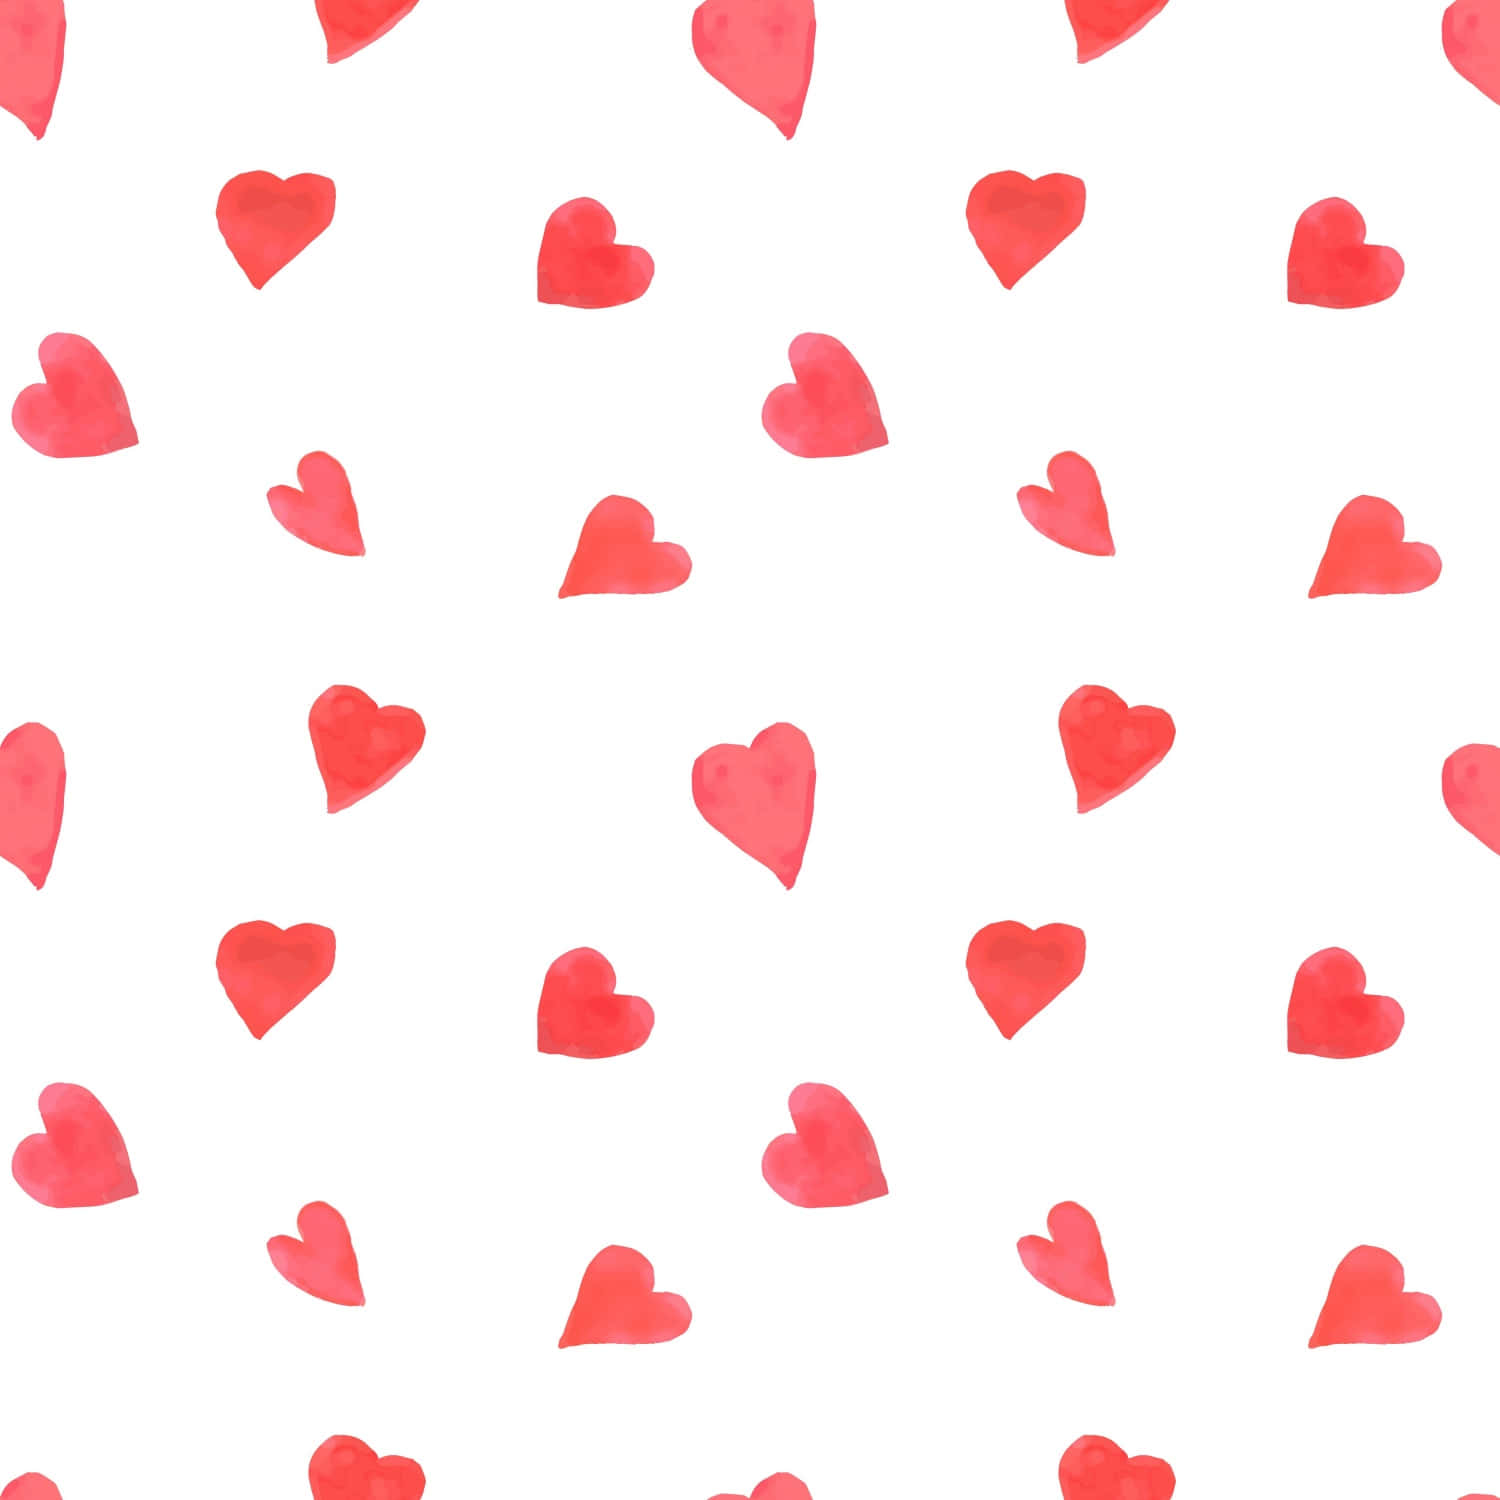 A seamless heart pattern in vibrant red shades Wallpaper